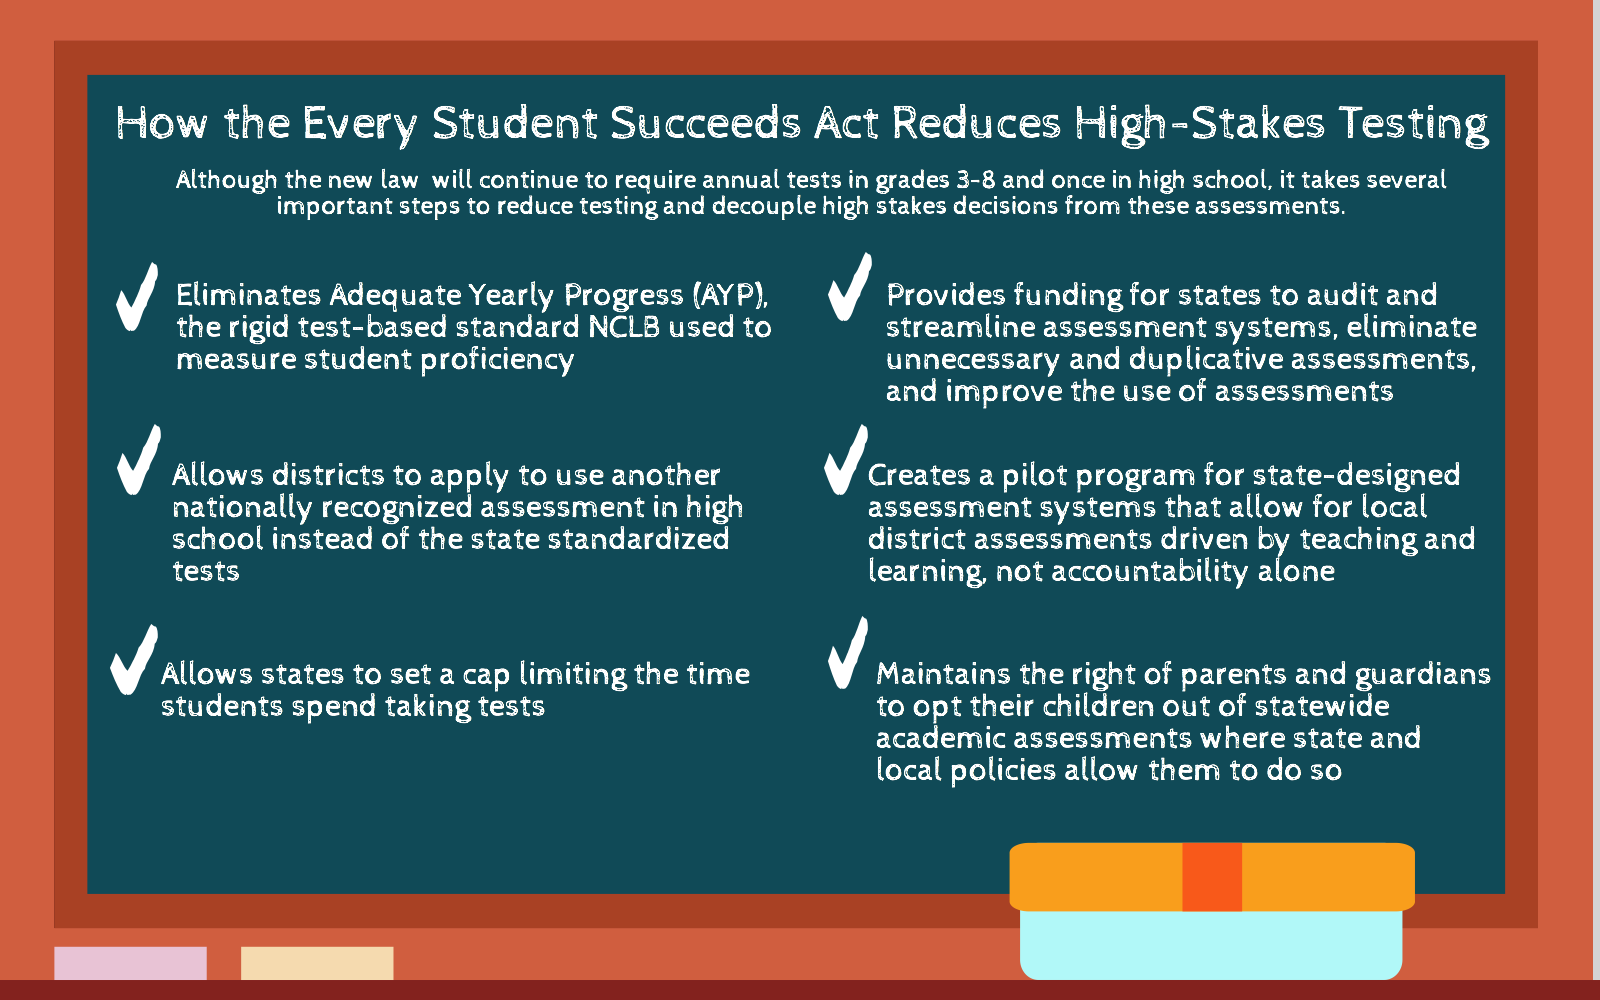 Every Student Succeeds Act and Testing